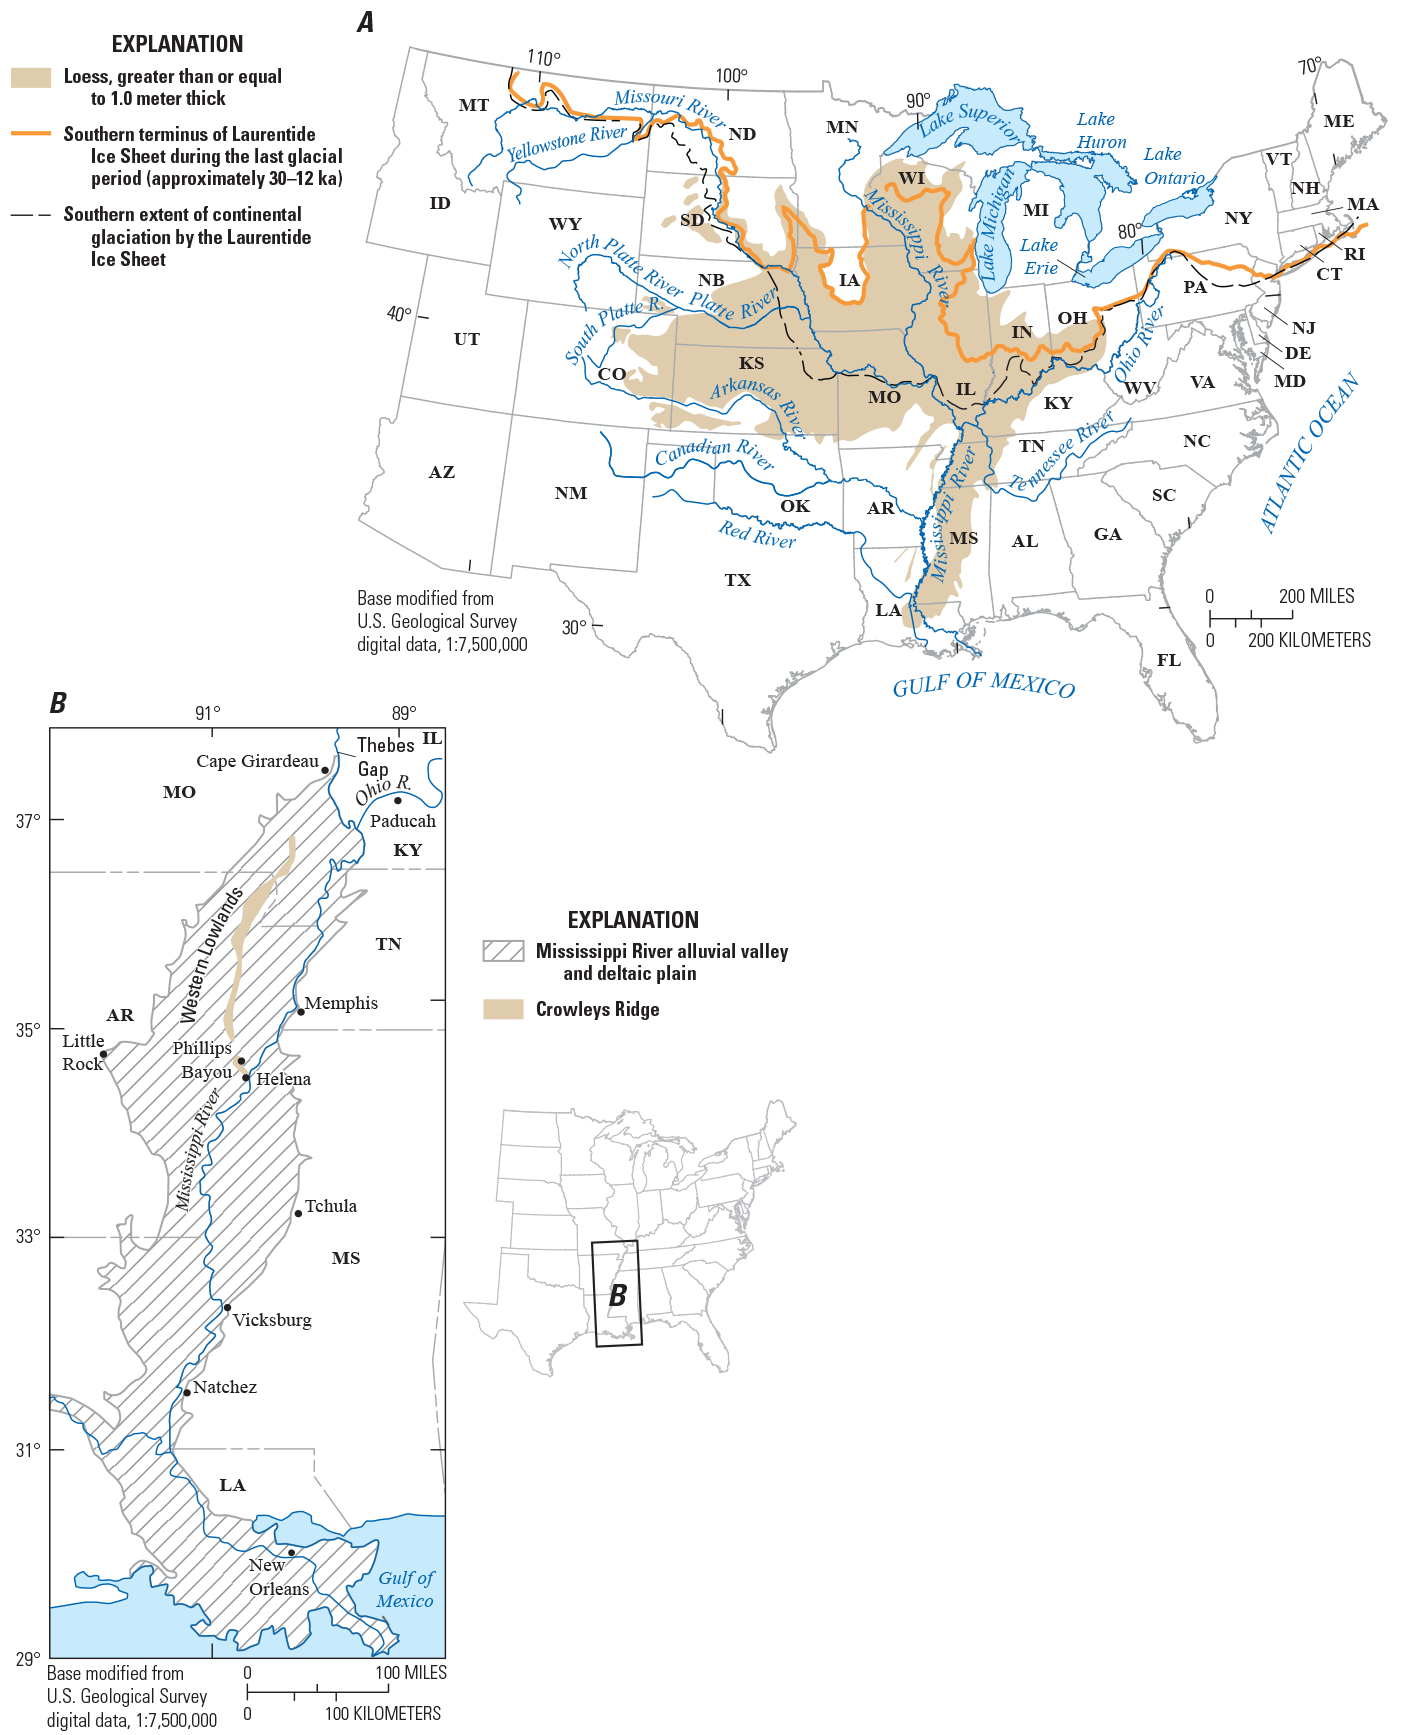 Loess deposits are concentrated mainly across the Great Plains and Mississippi River
                     valley south of the extent of the Laurentide Ice Sheet.